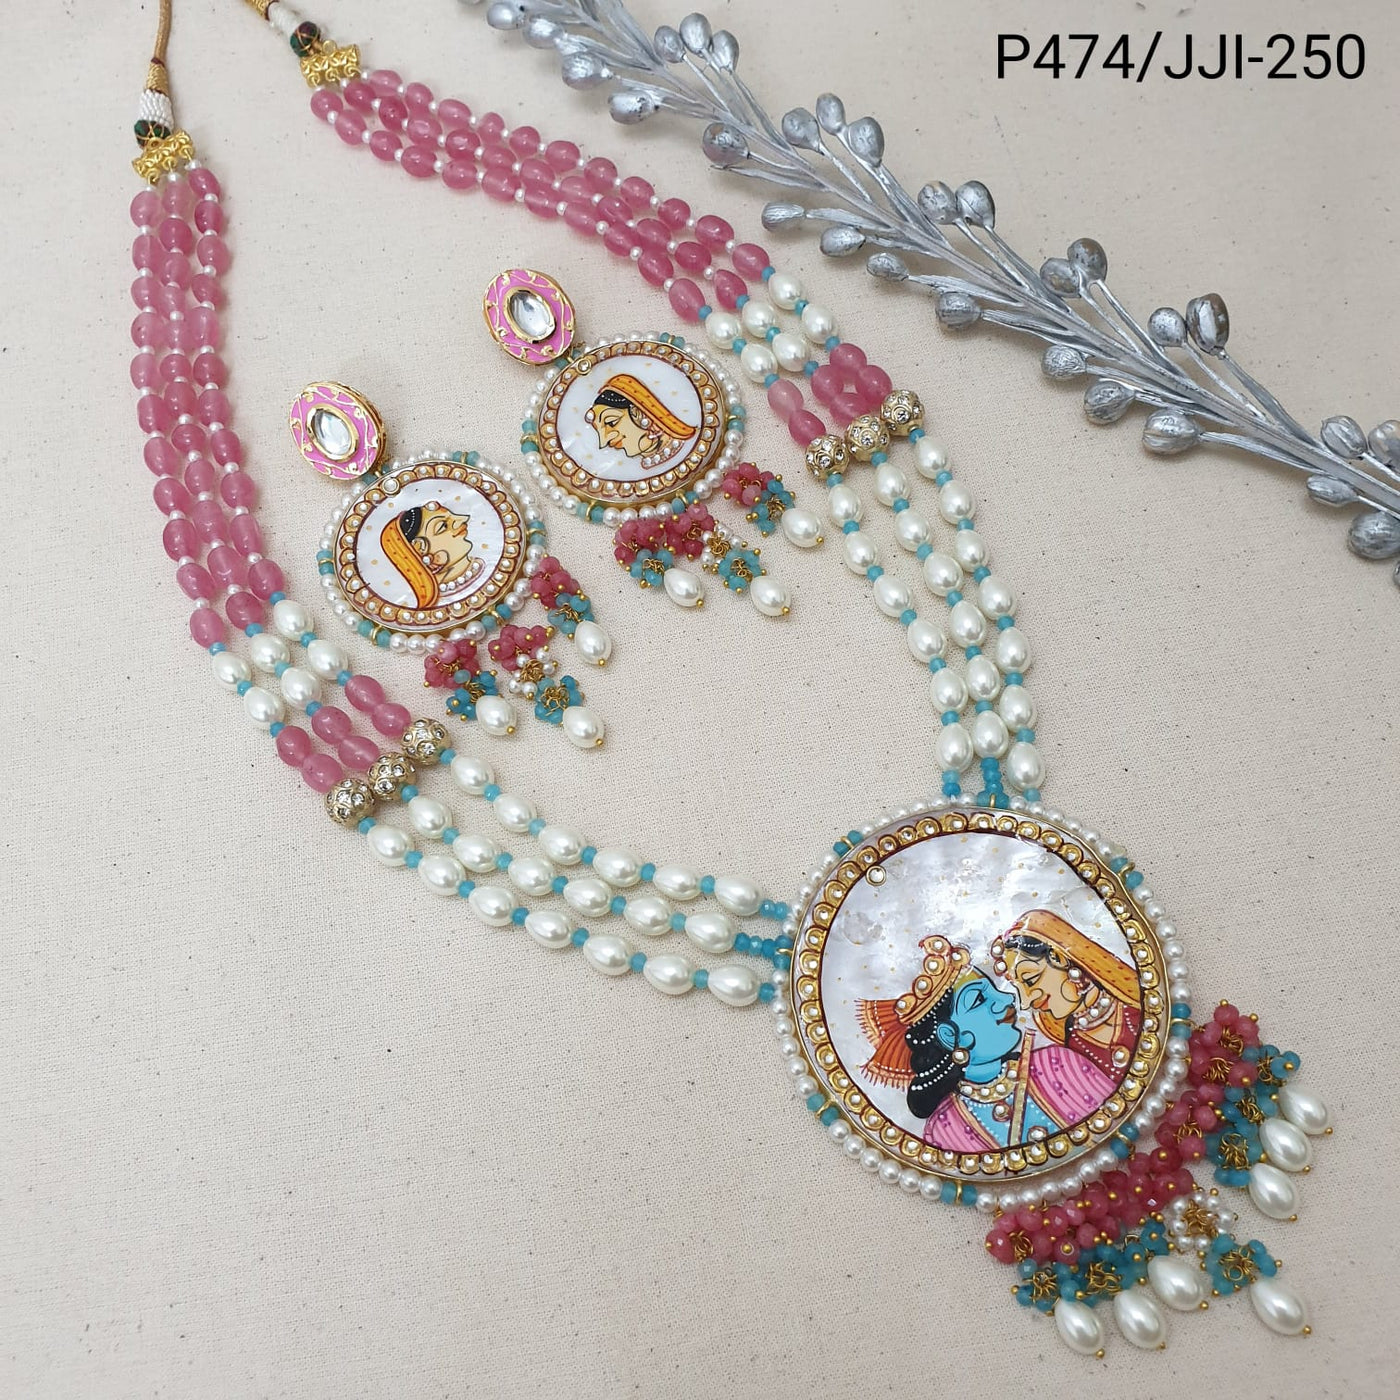 Adorn Yourself with the Timeless Beauty of our Radha Krishna Pendant Set